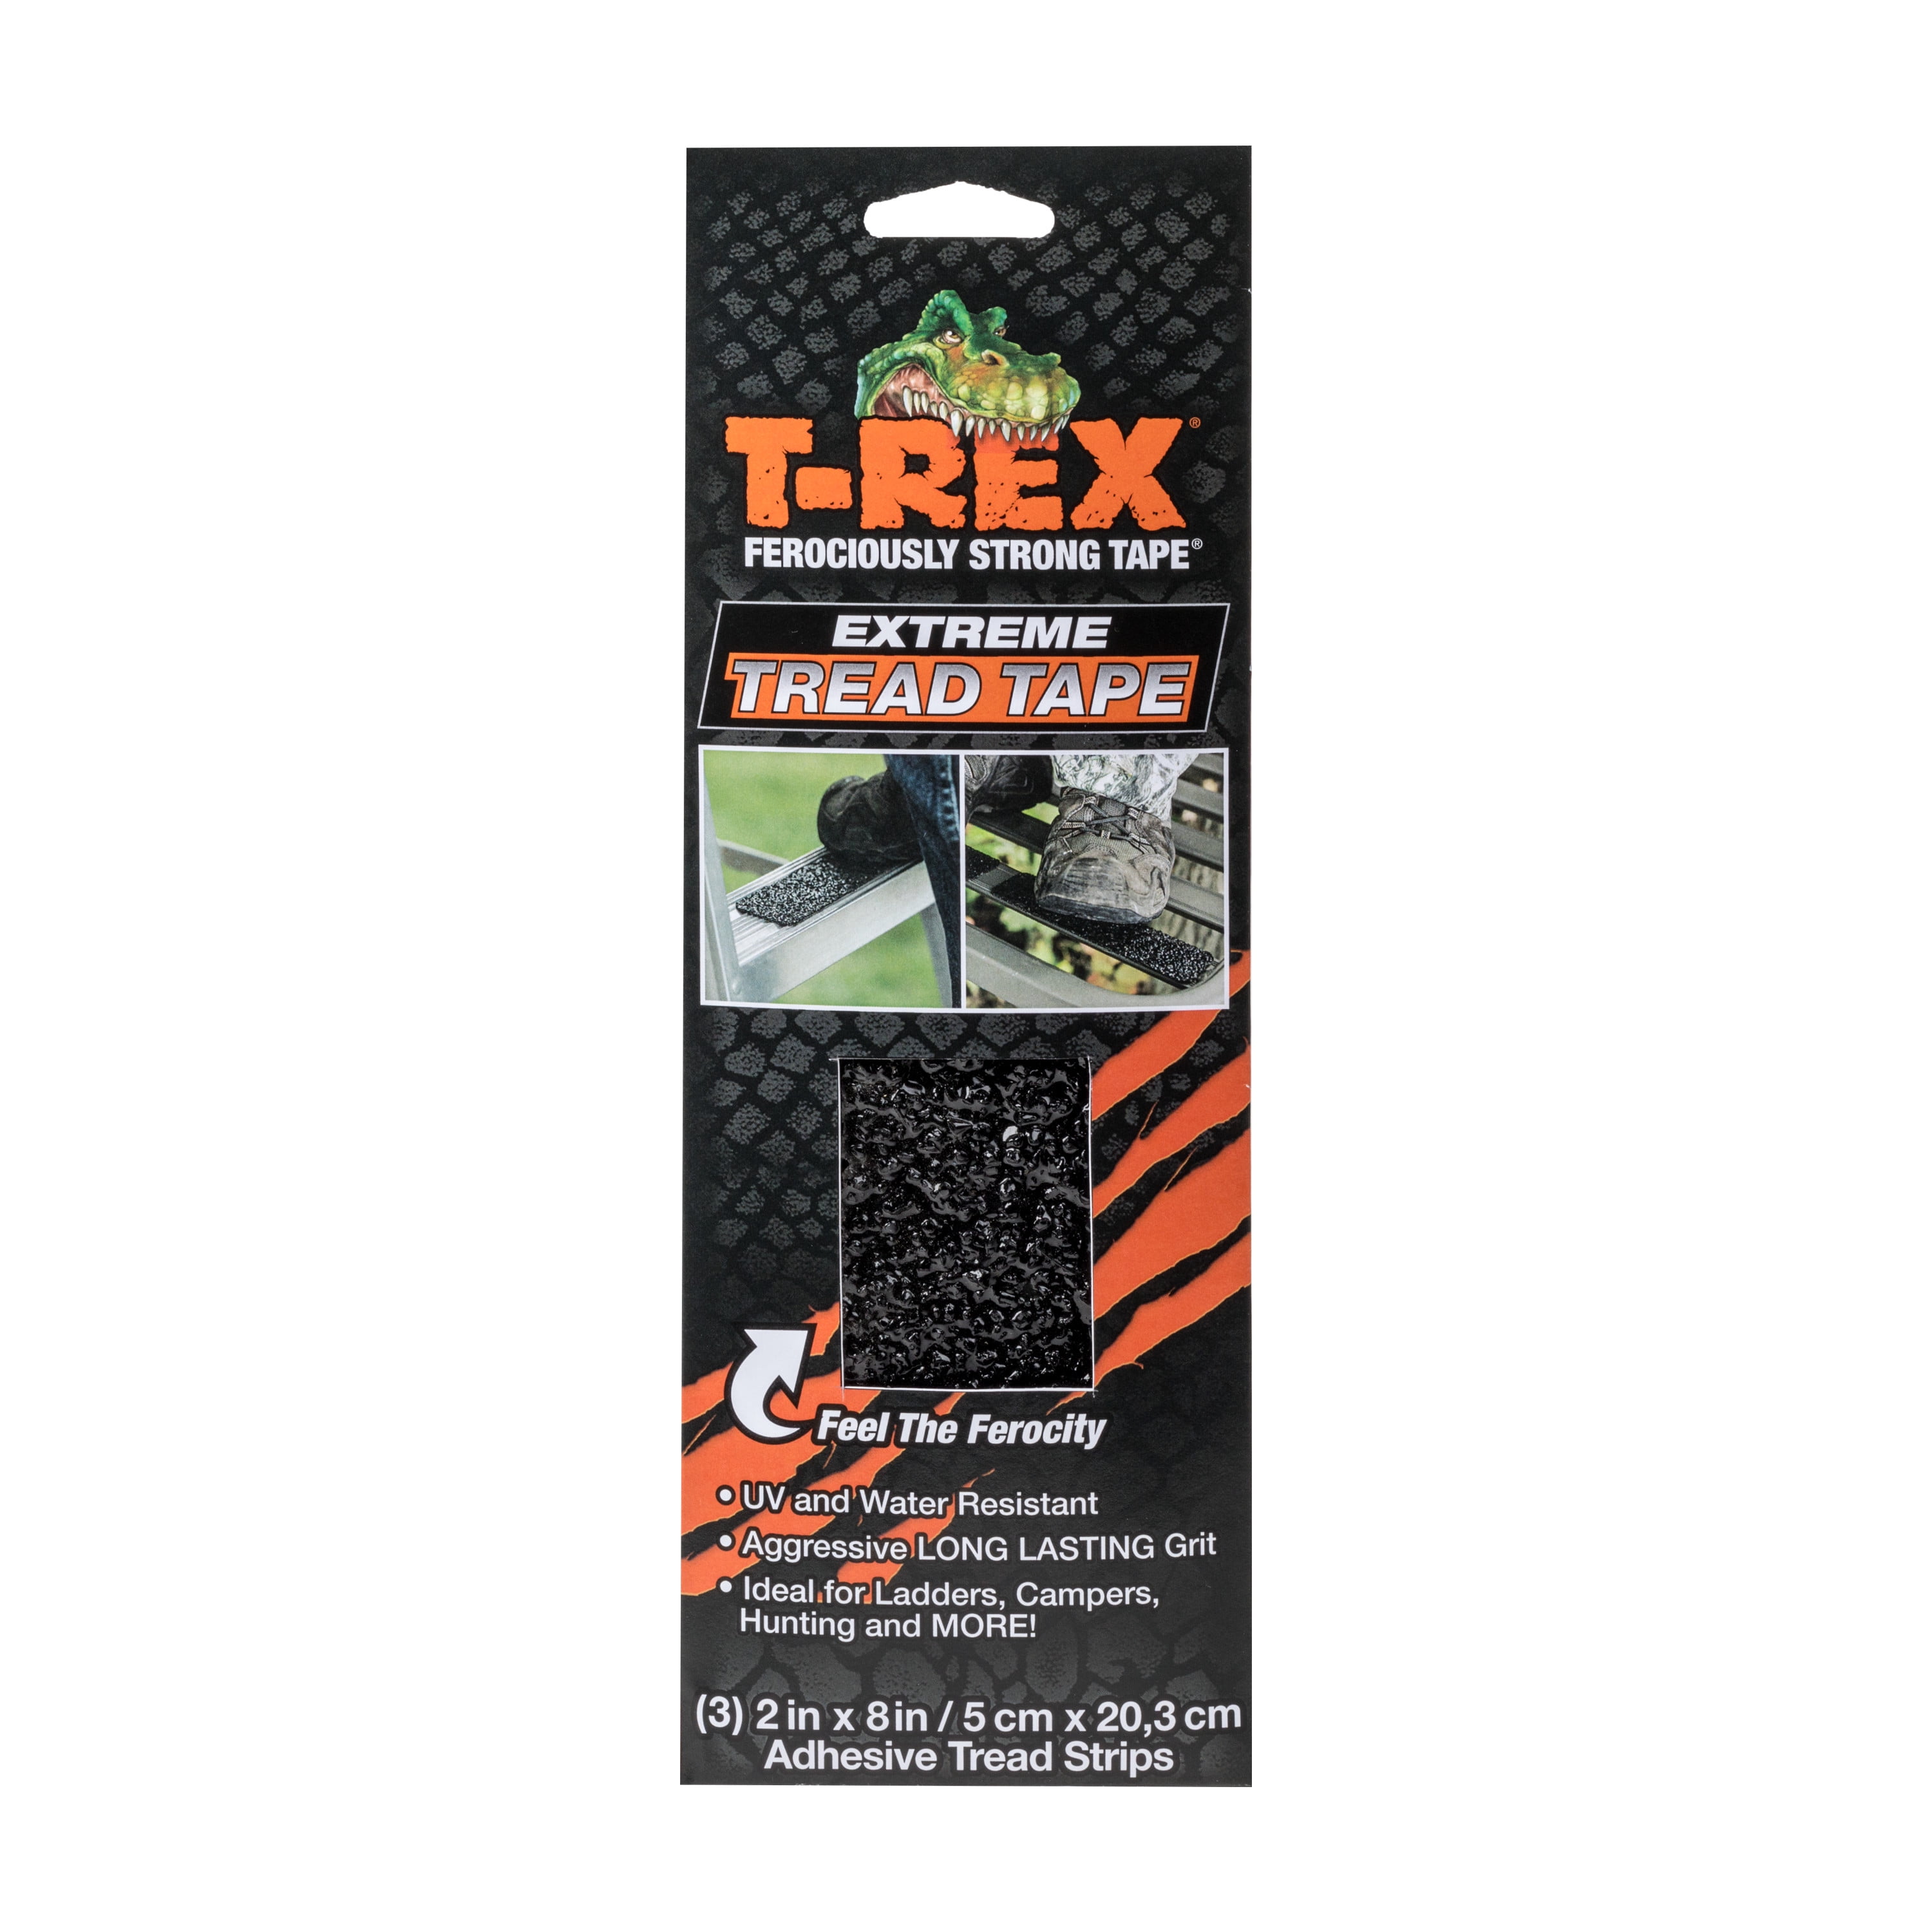 Duct Tape T-REX BRUTE FORCE PERFORMANCE DUCT TAPE 1.88in x 20 yds